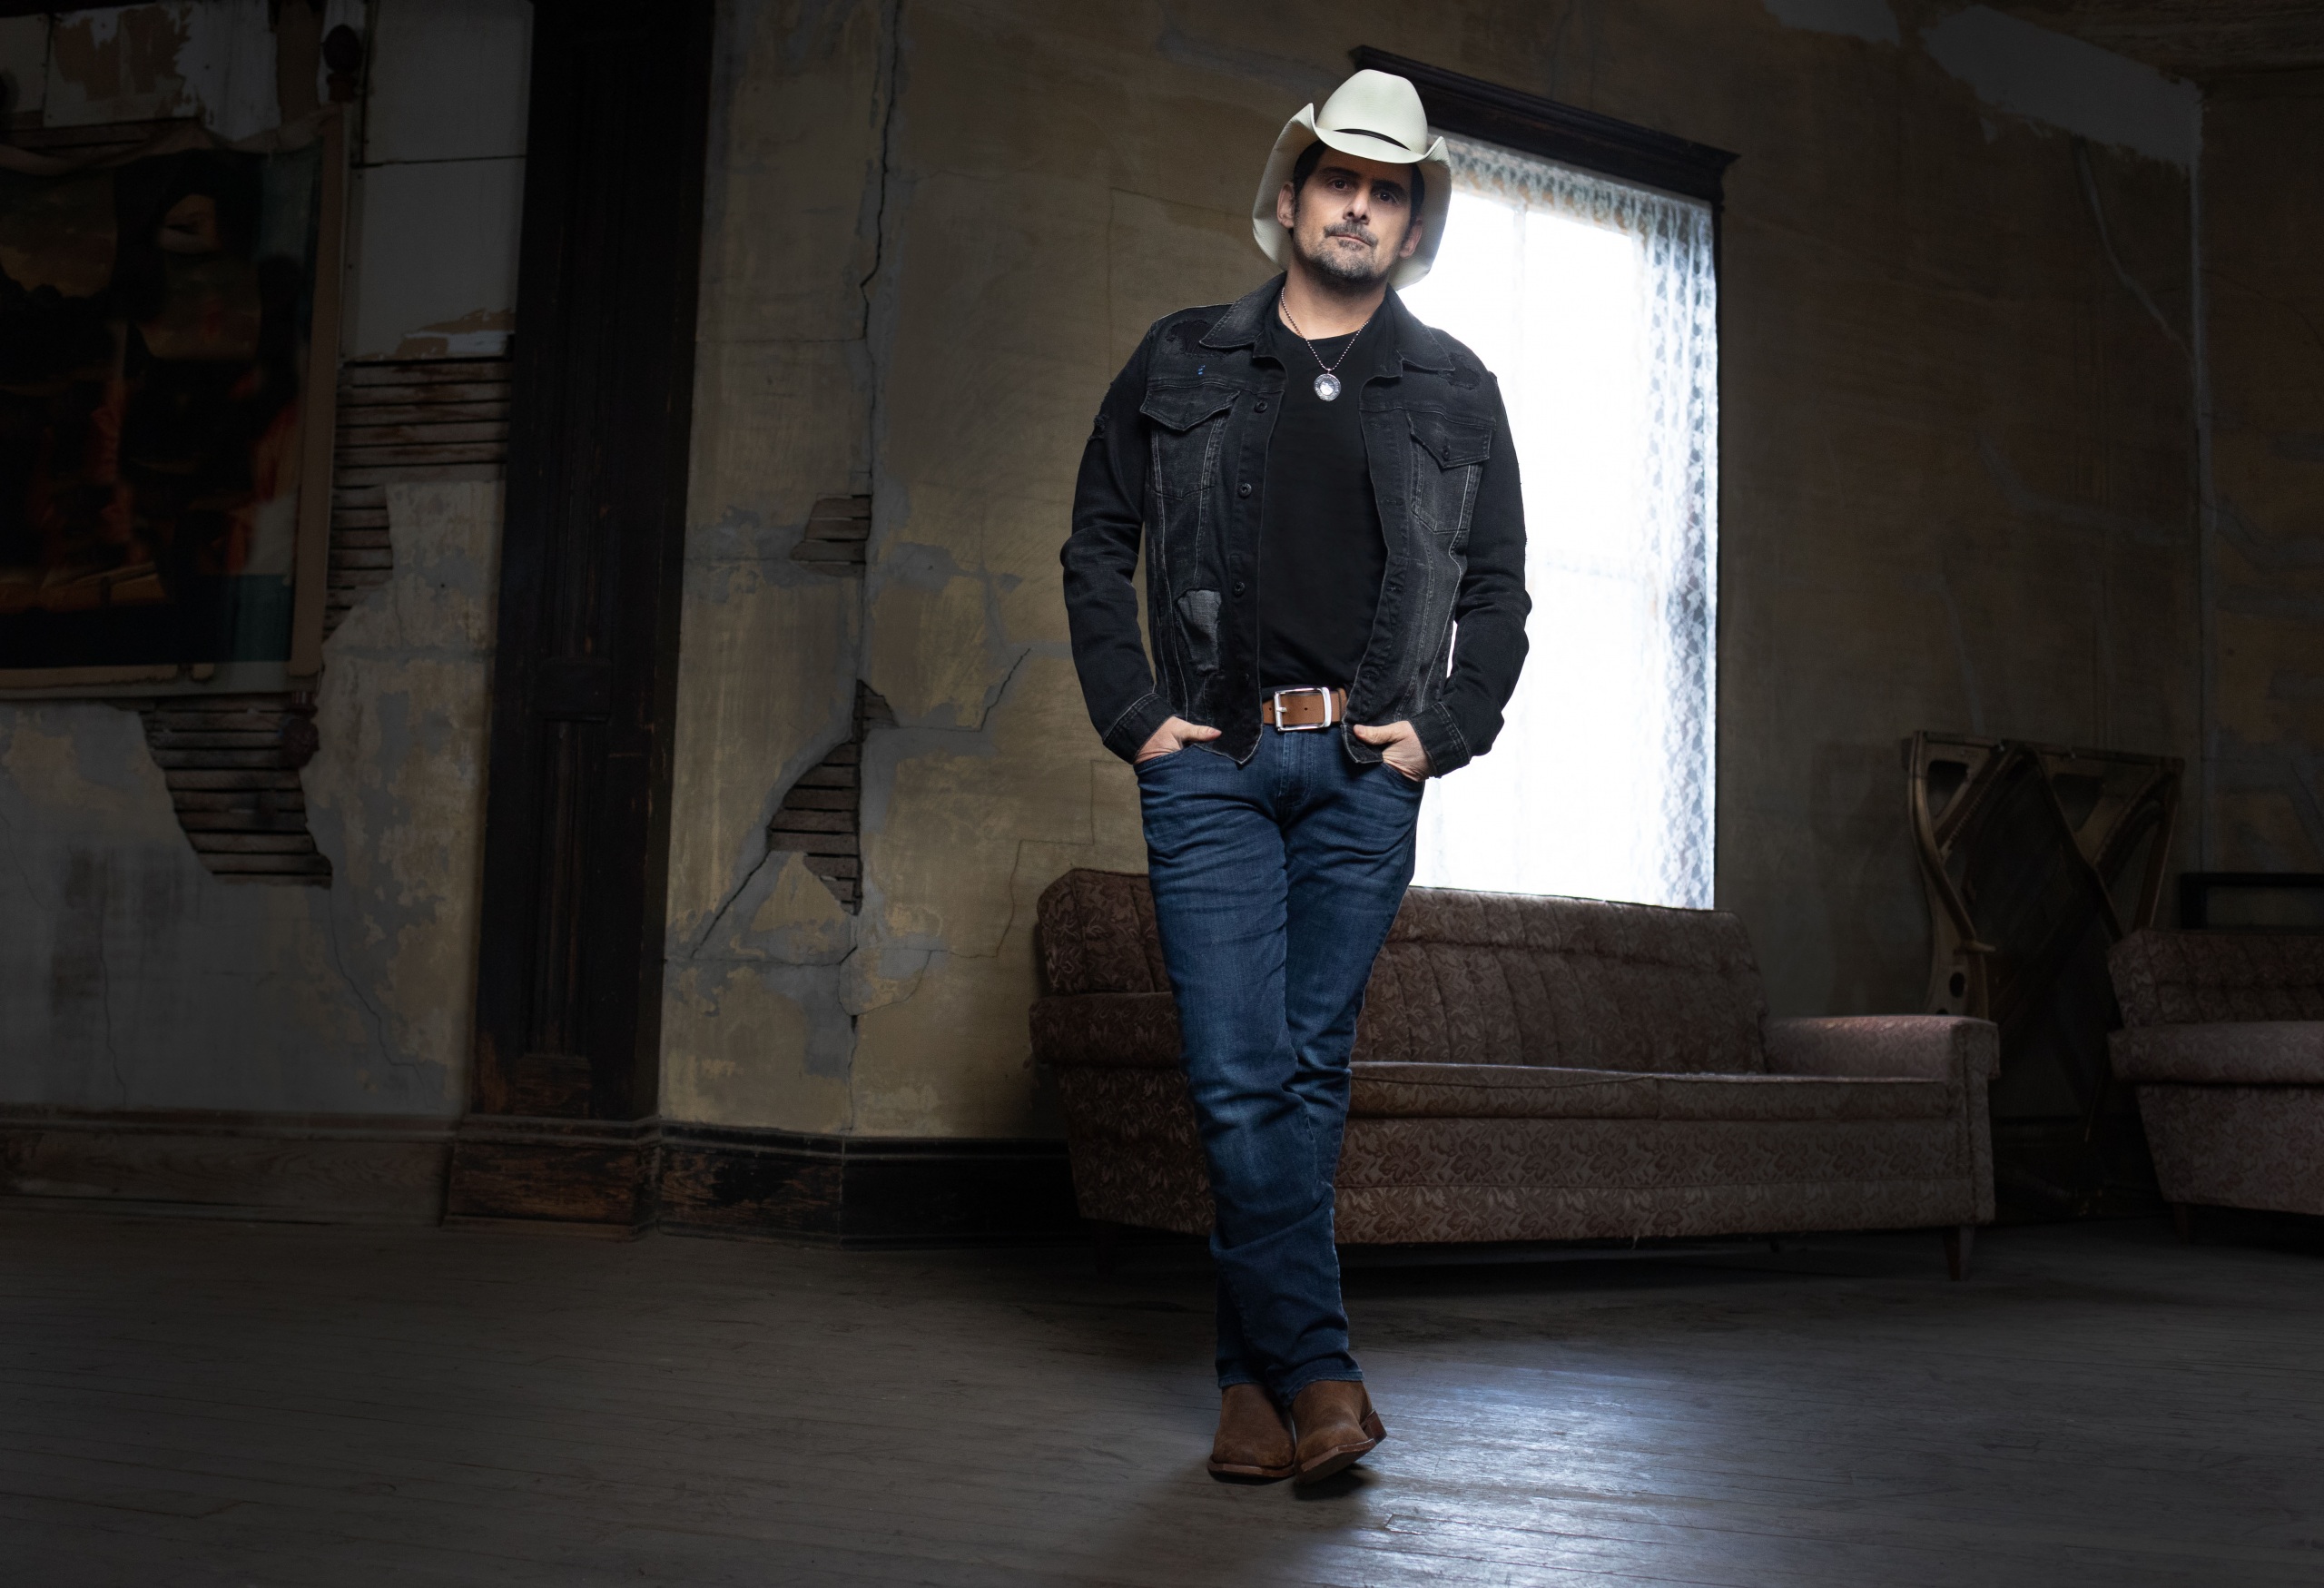 BRAD PAISLEY SET TO PREMIERE TWO NEW SONGS, ALONG WITH POIGNANT VIDEOS, ON FRIDAY.